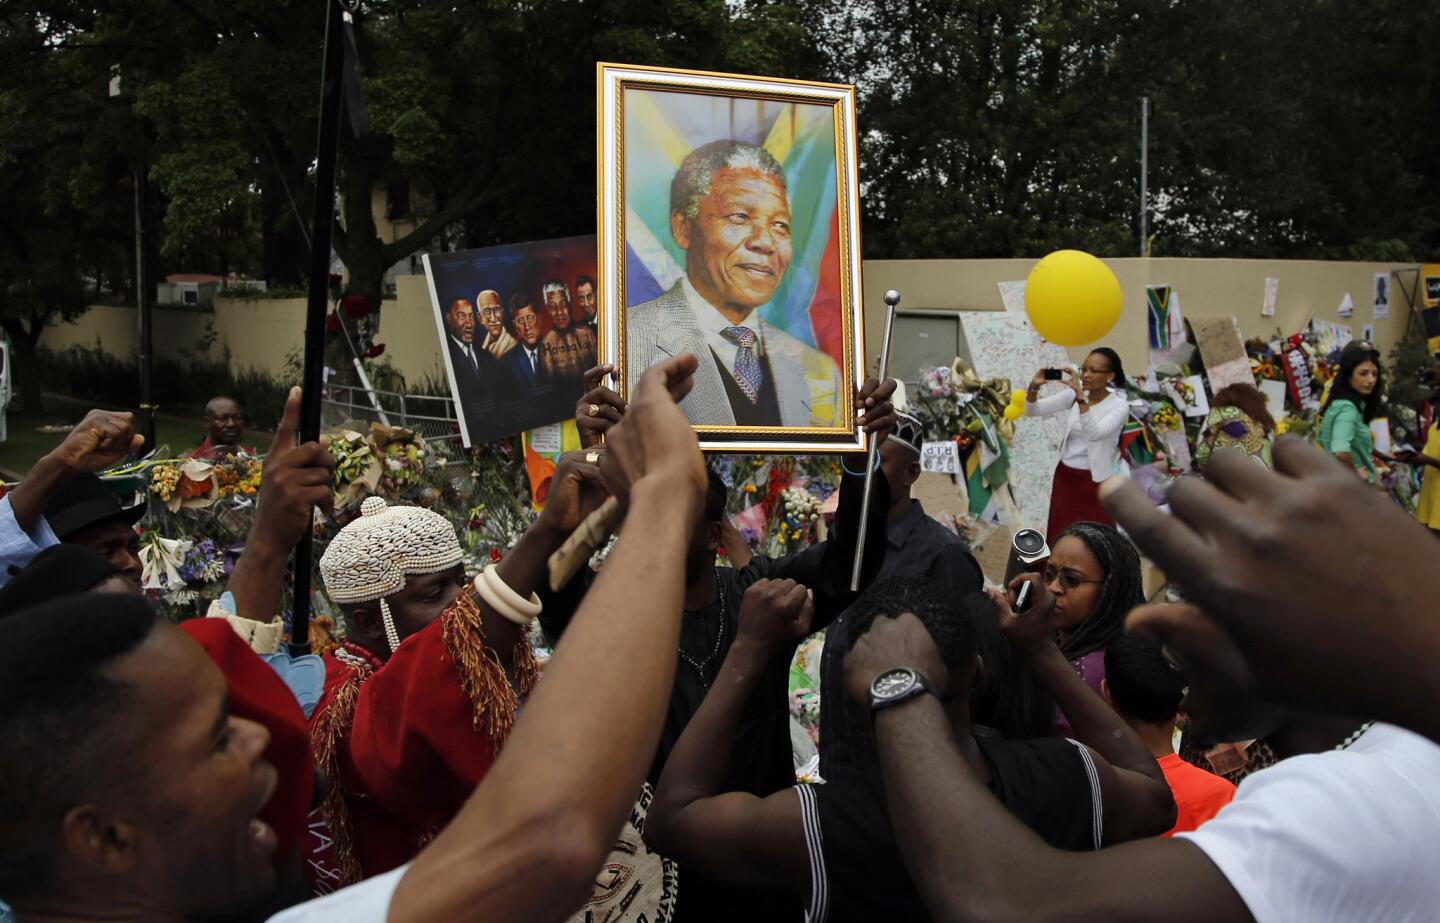 Mourners from Nigeria sing outside the home of former South African President Nelson Mandela in Johannesburg, South Africa. Scores of heads of state and government and other foreign dignitaries, including royalty, are beginning to converge on South Africa as the final preparations for Tuesday's national memorial service for Mandela are put in place.